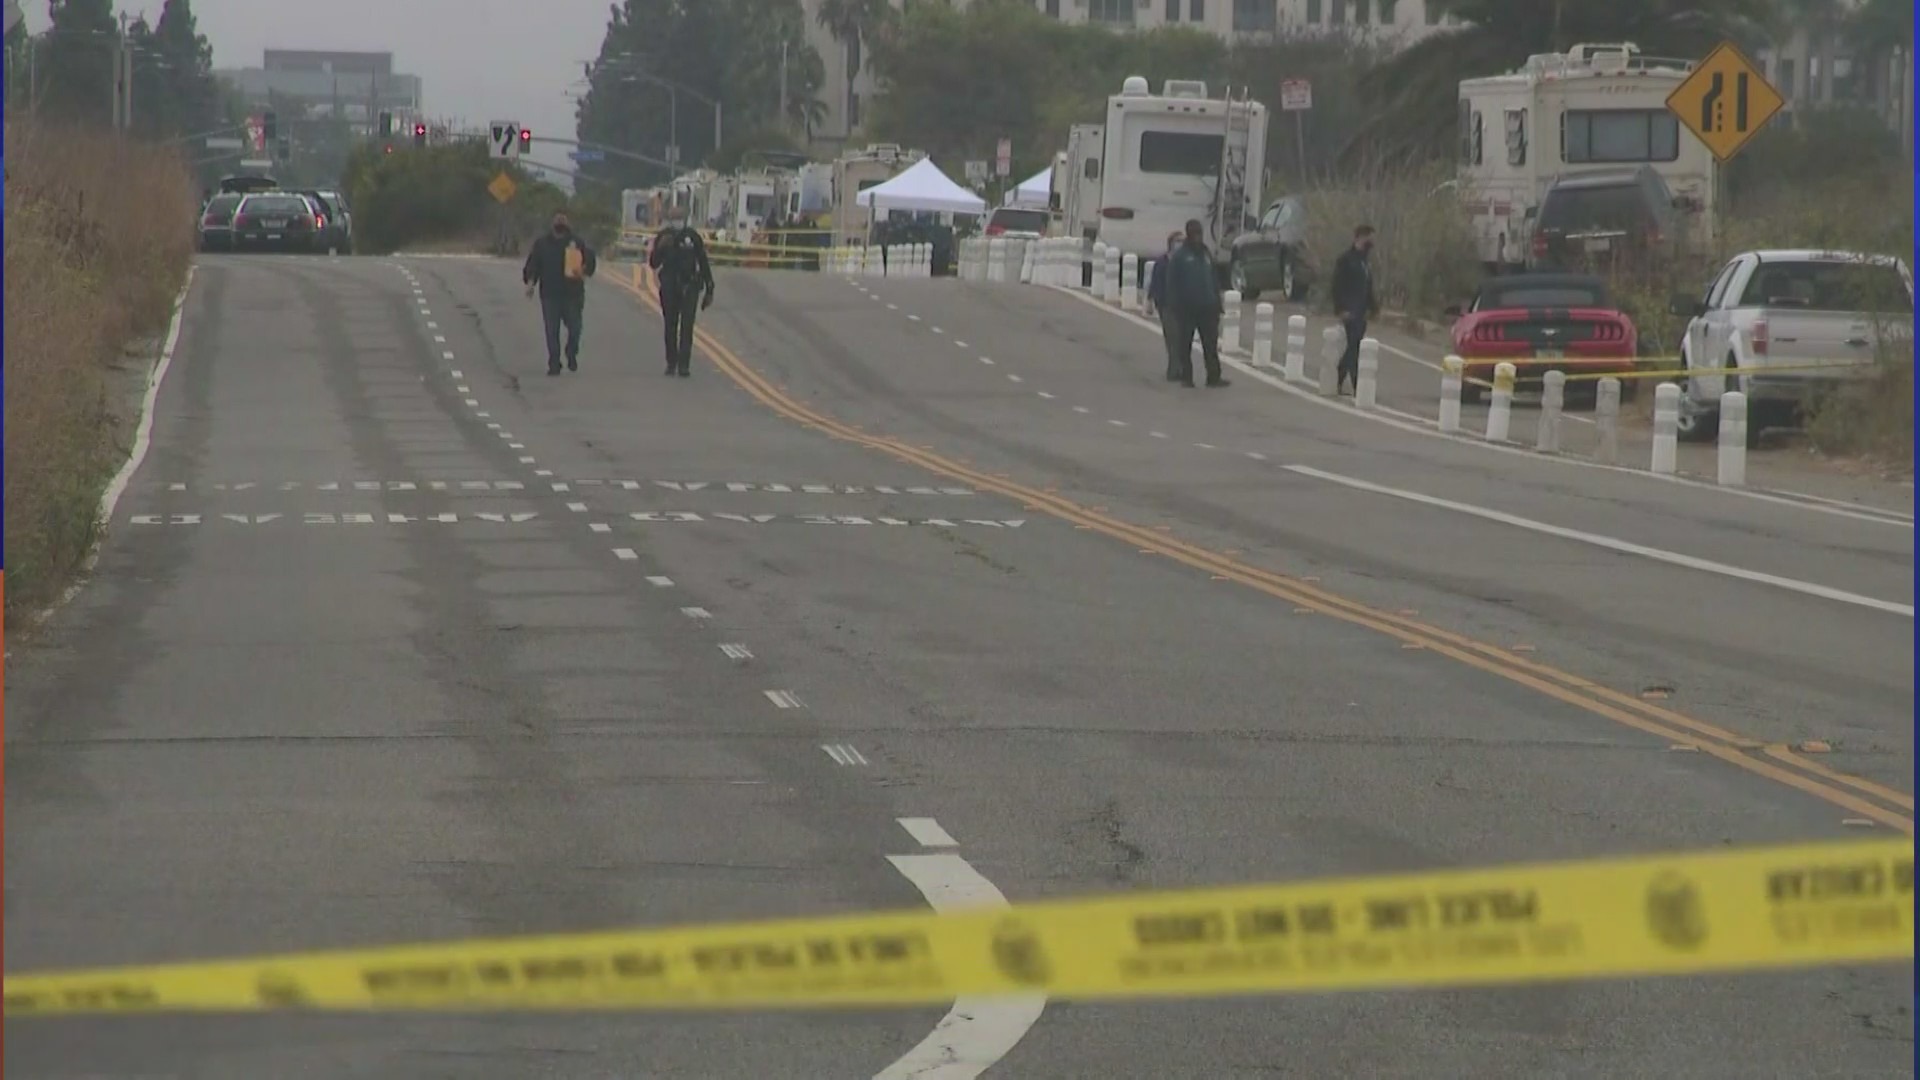 Four people believed to be homeless were wounded in a predawn shooting in Playa del Rey on Aug. 18, 2021. (KTLA)